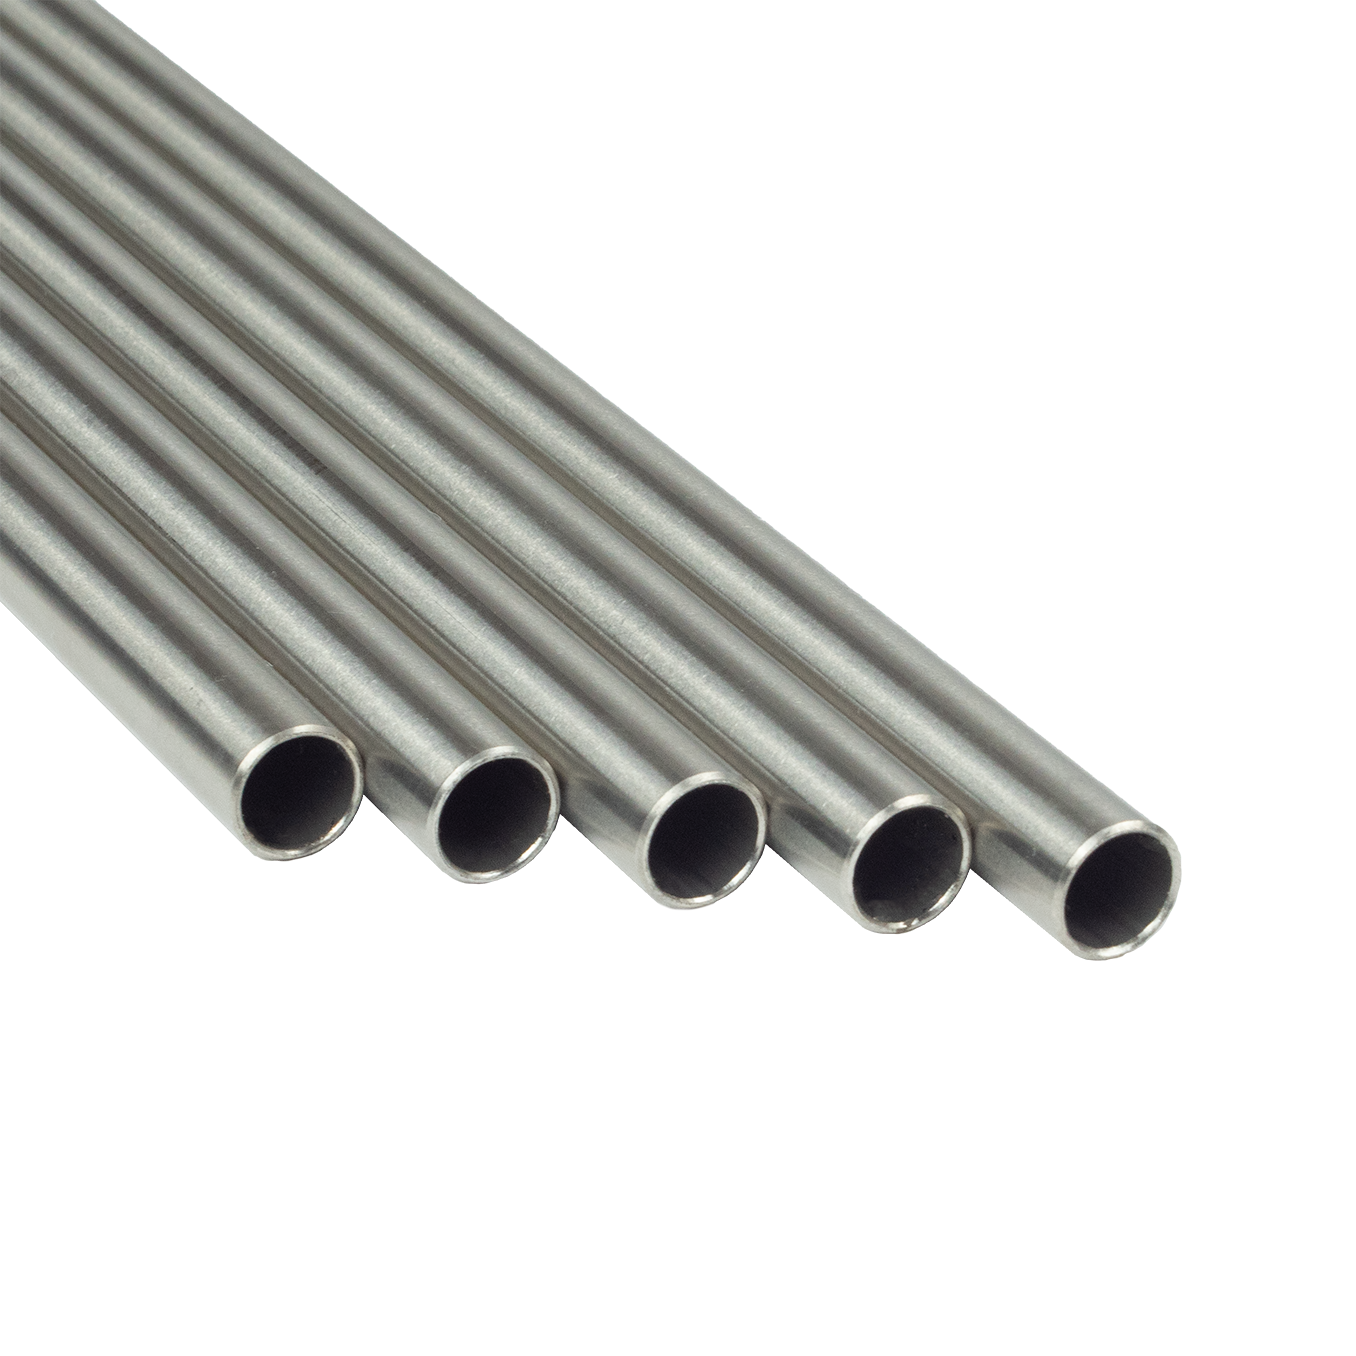 SFS Stand Tube - Ø 13 x 1 mm, length 630 mm - stainless steel